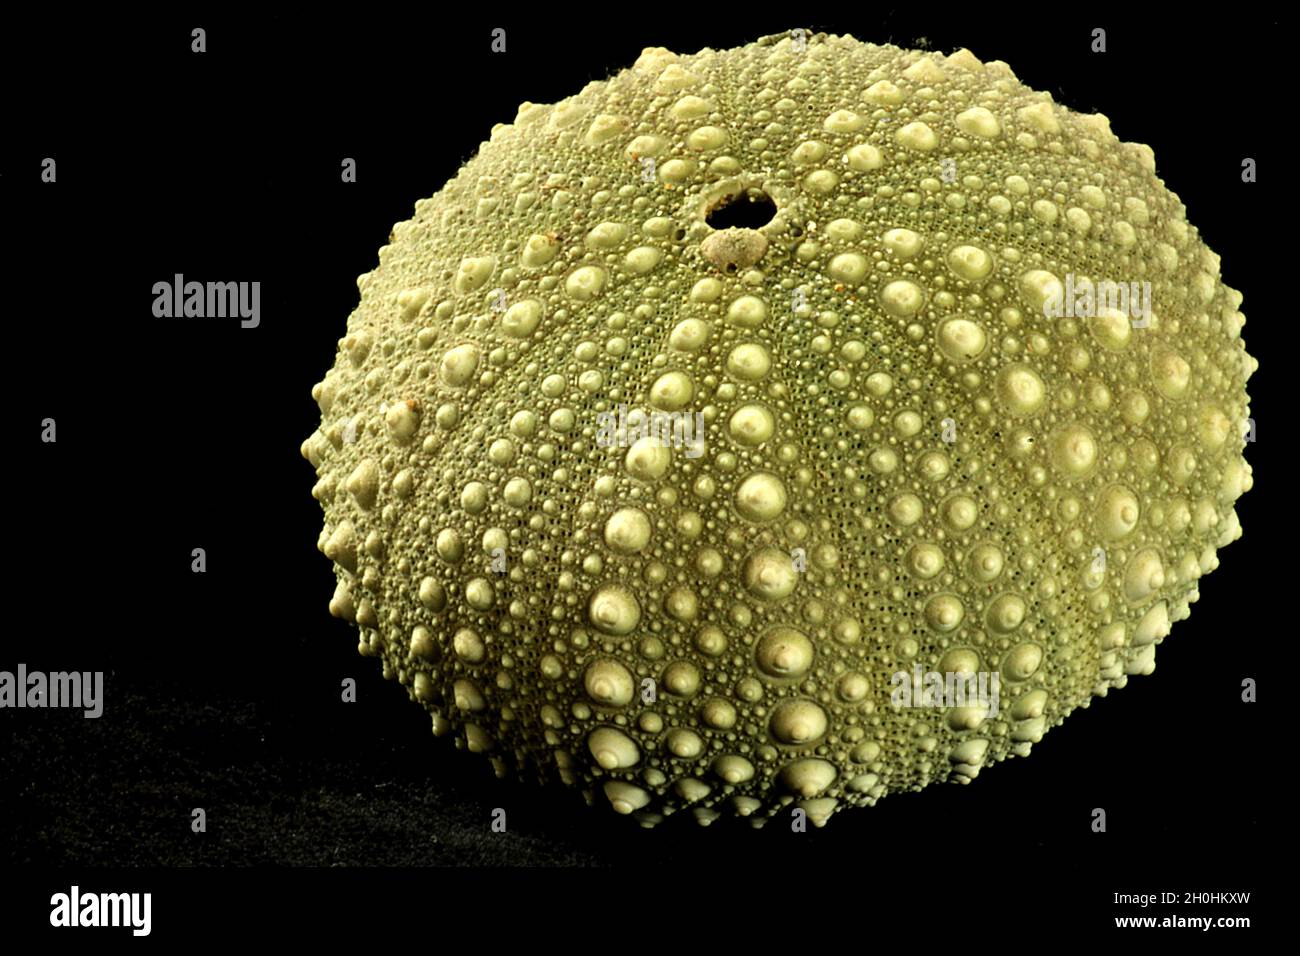 Exposed skeleton or test of seaurchin (Evichinus chloroticus) Stock Photo